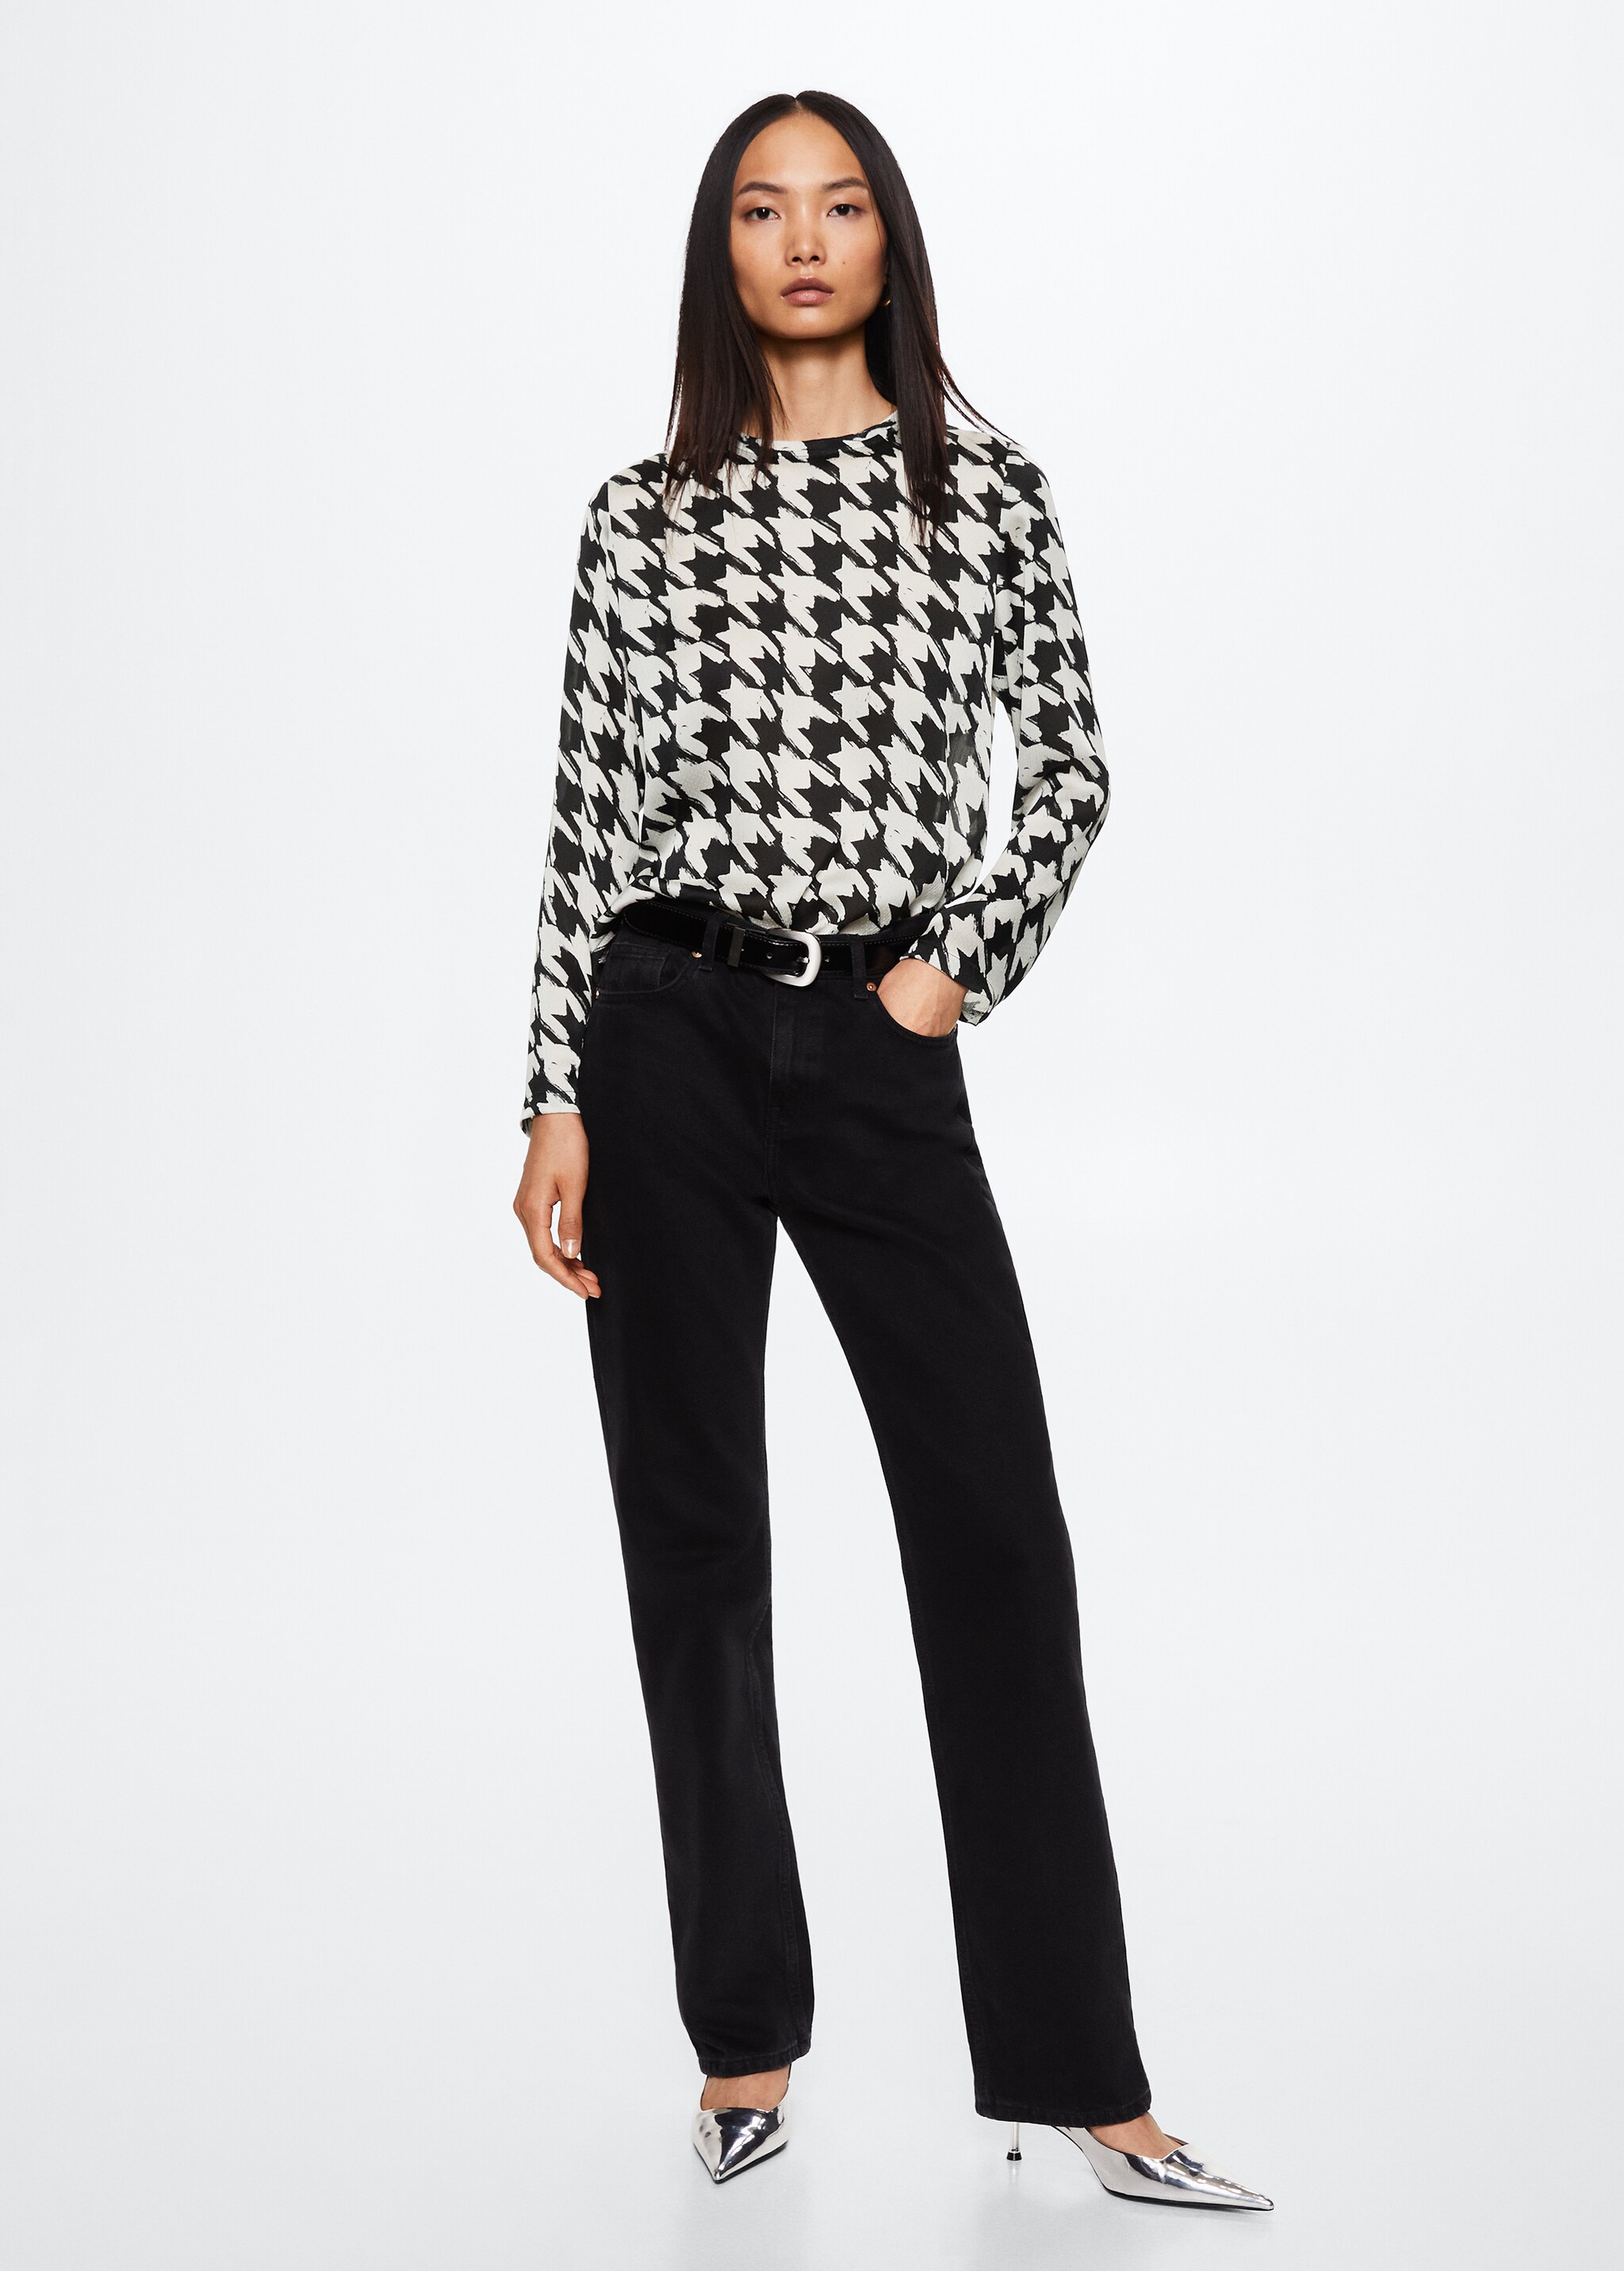 Houndstooth blouse - General plane